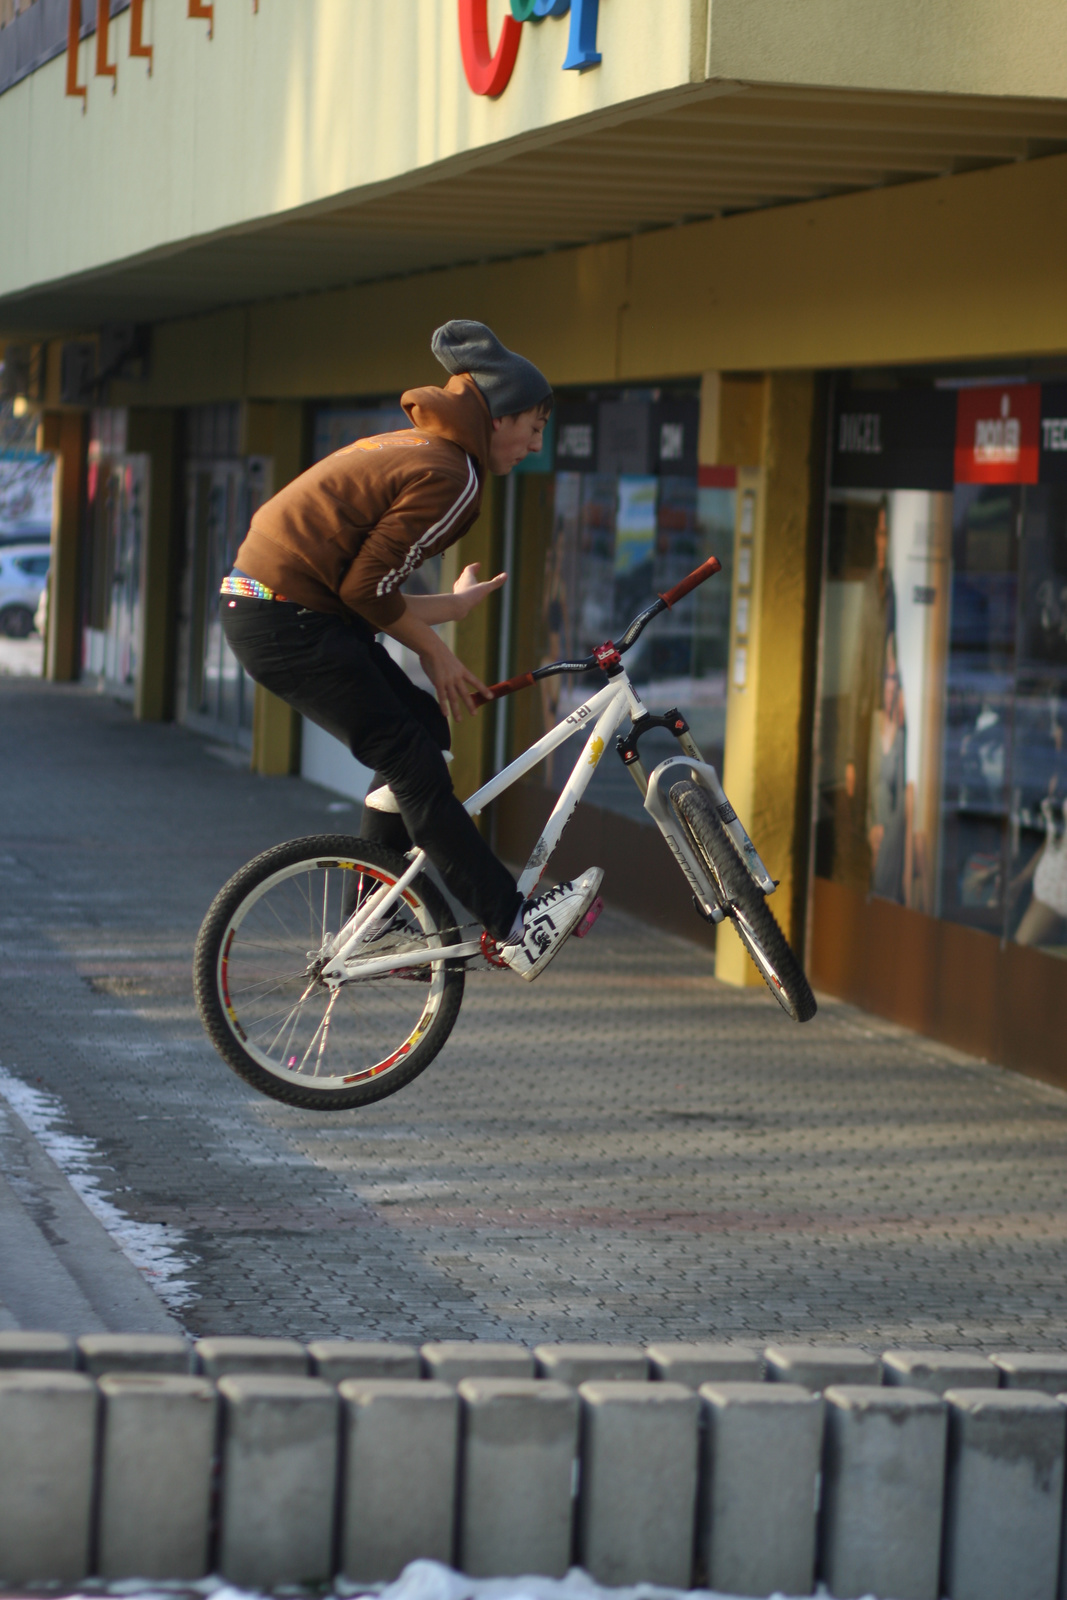 4stairs barspin (KLB)